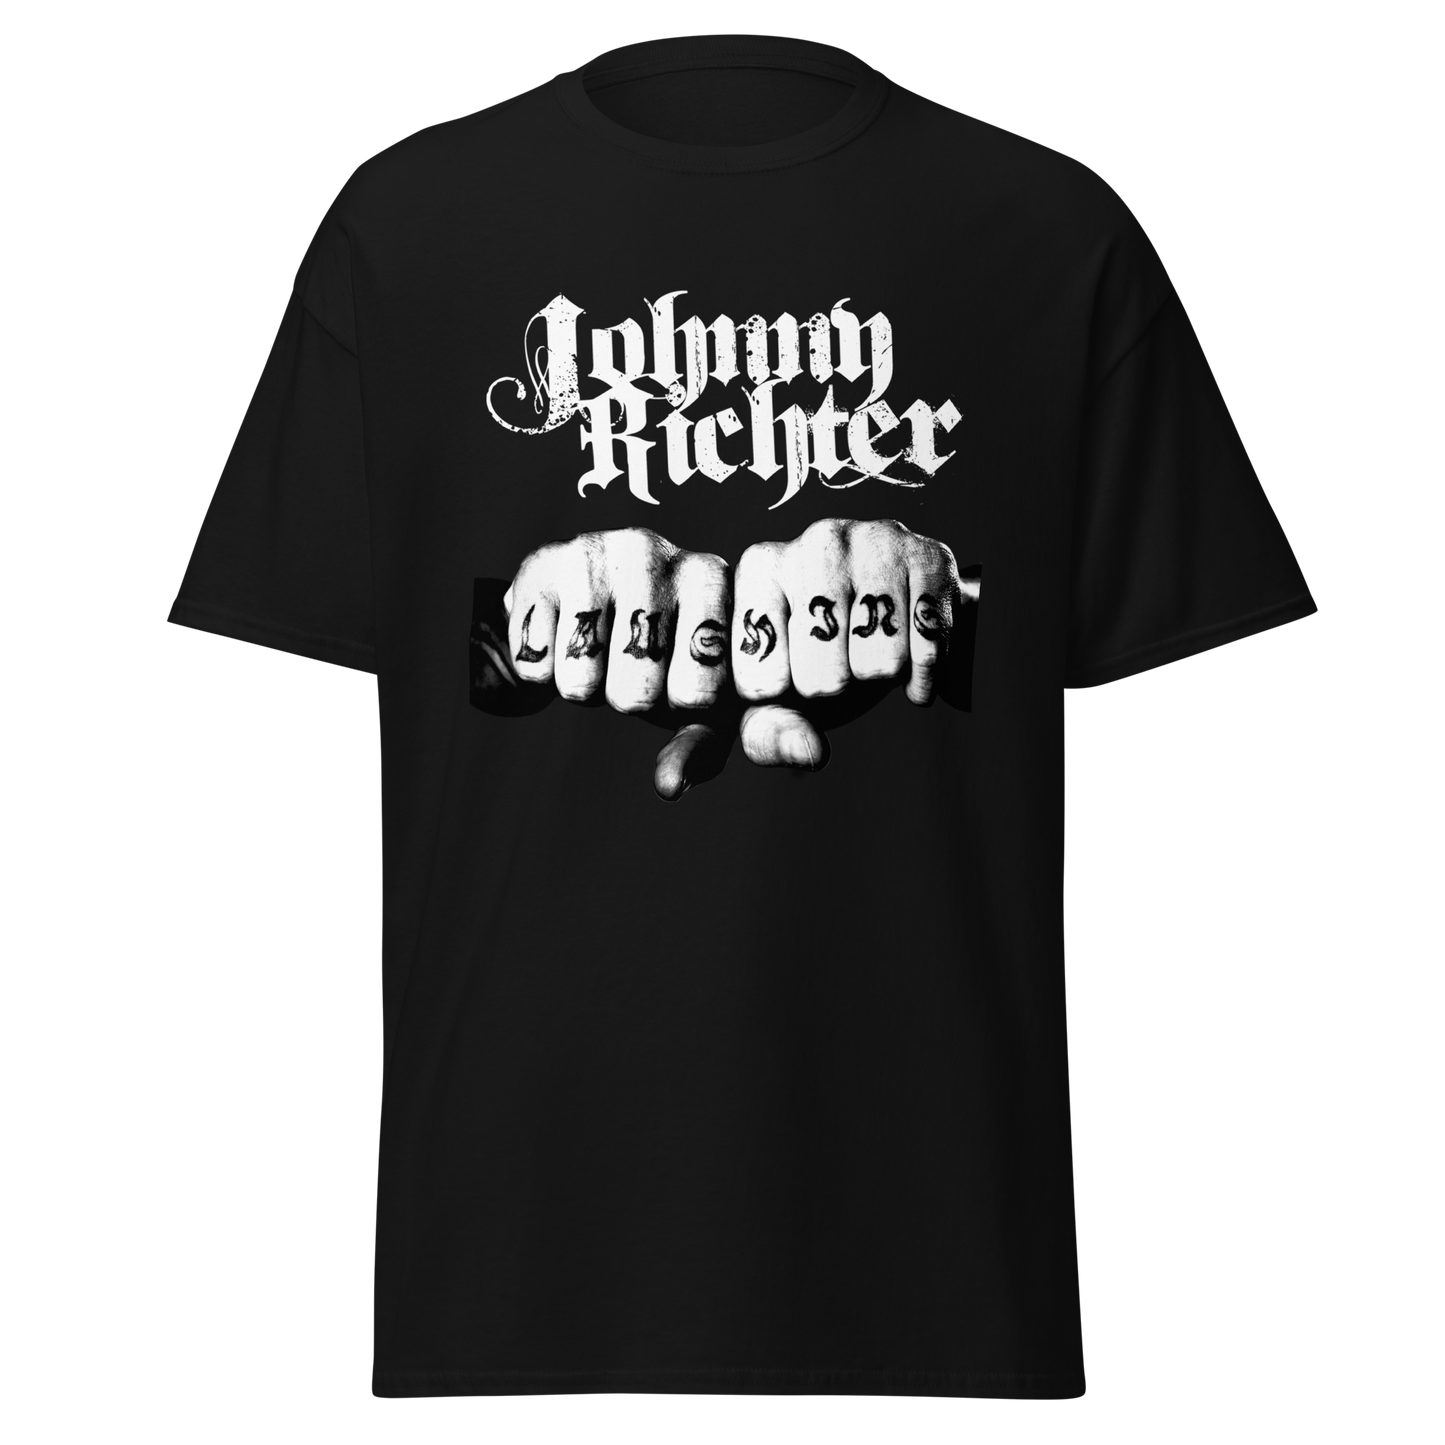 Johnny Richter Laughing Tee